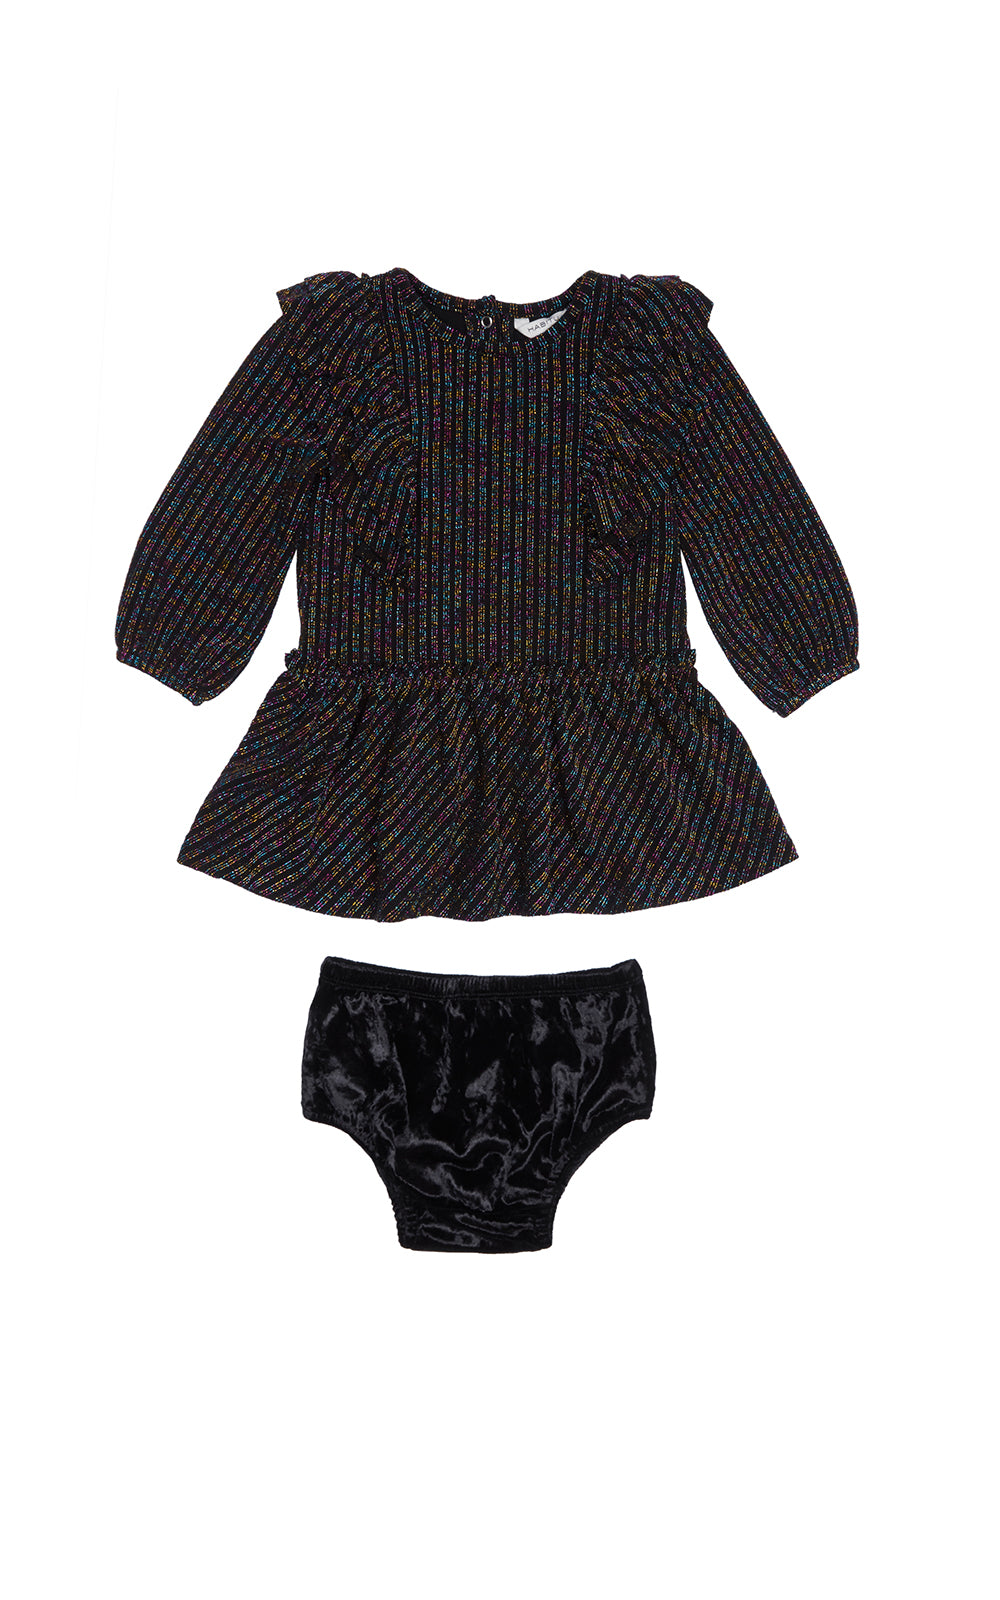 Black long-sleeve dress with multi-colored metallic stripes and ruffle-trim shoulders and solid black panty cover. 